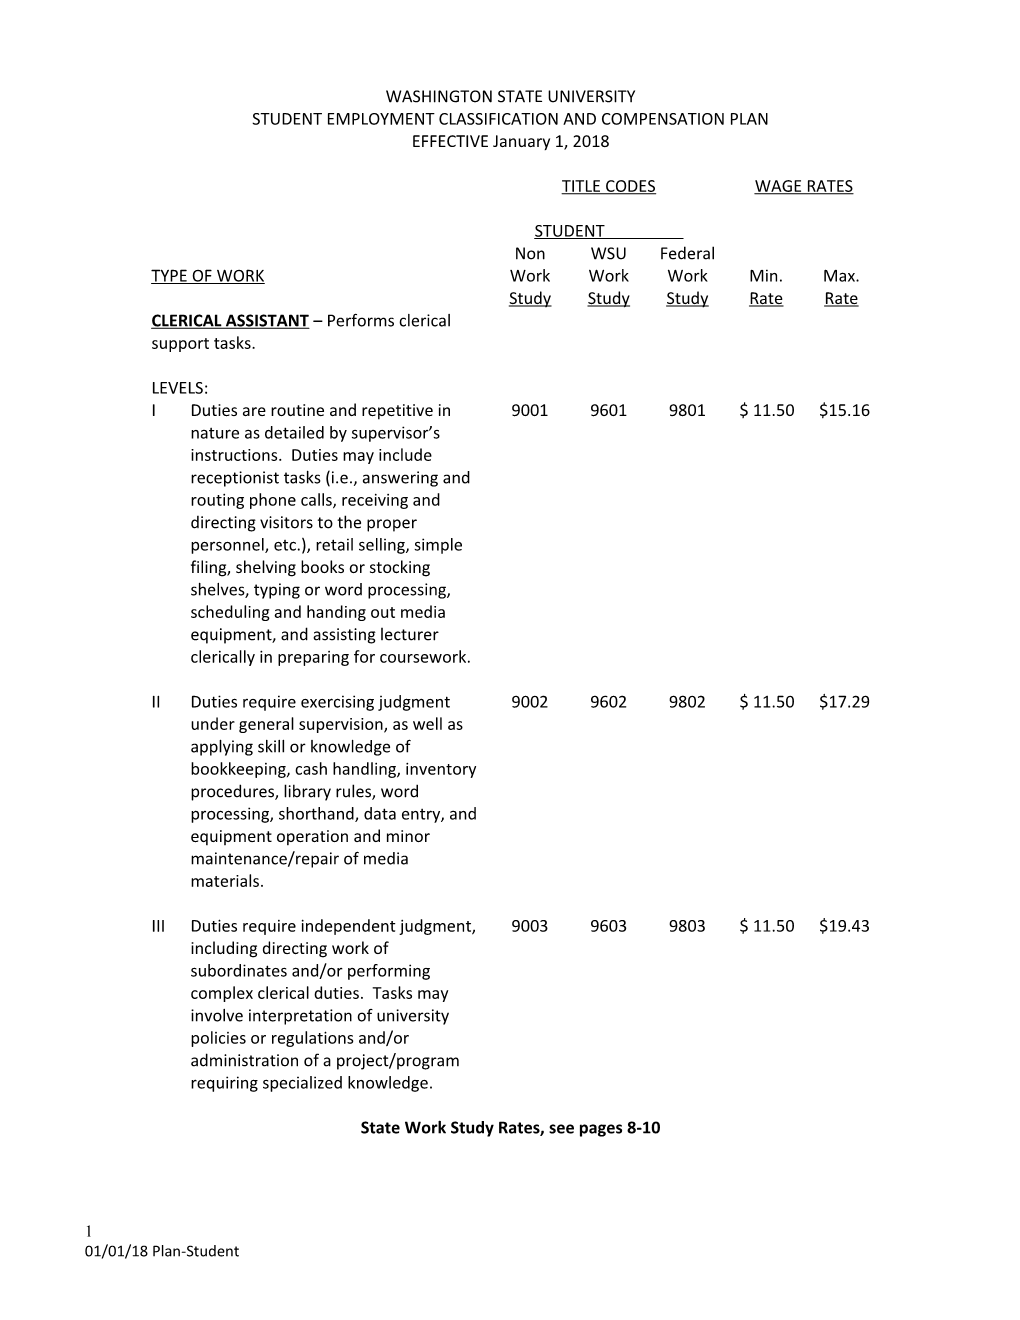 Student Employment Classification and Compensation Plan